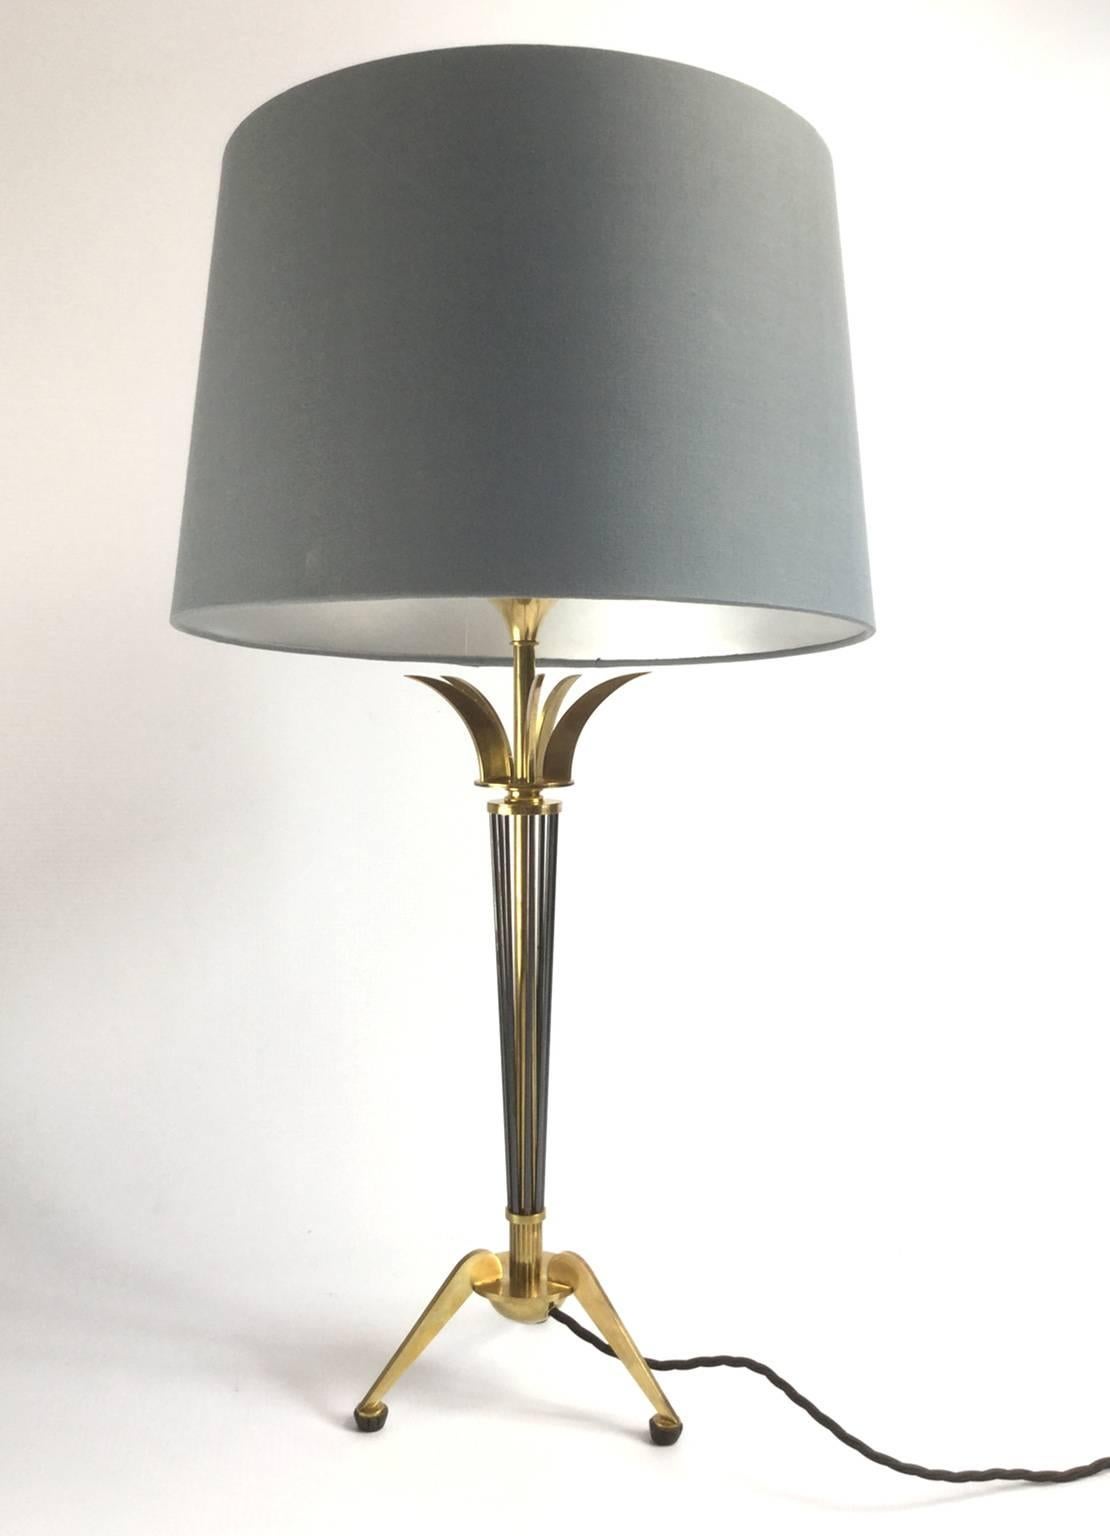 Brass and bronze 1950s table lamp attributed to Maison Jansen
Measurement without shade:
53 cm height
19 cm base width.

